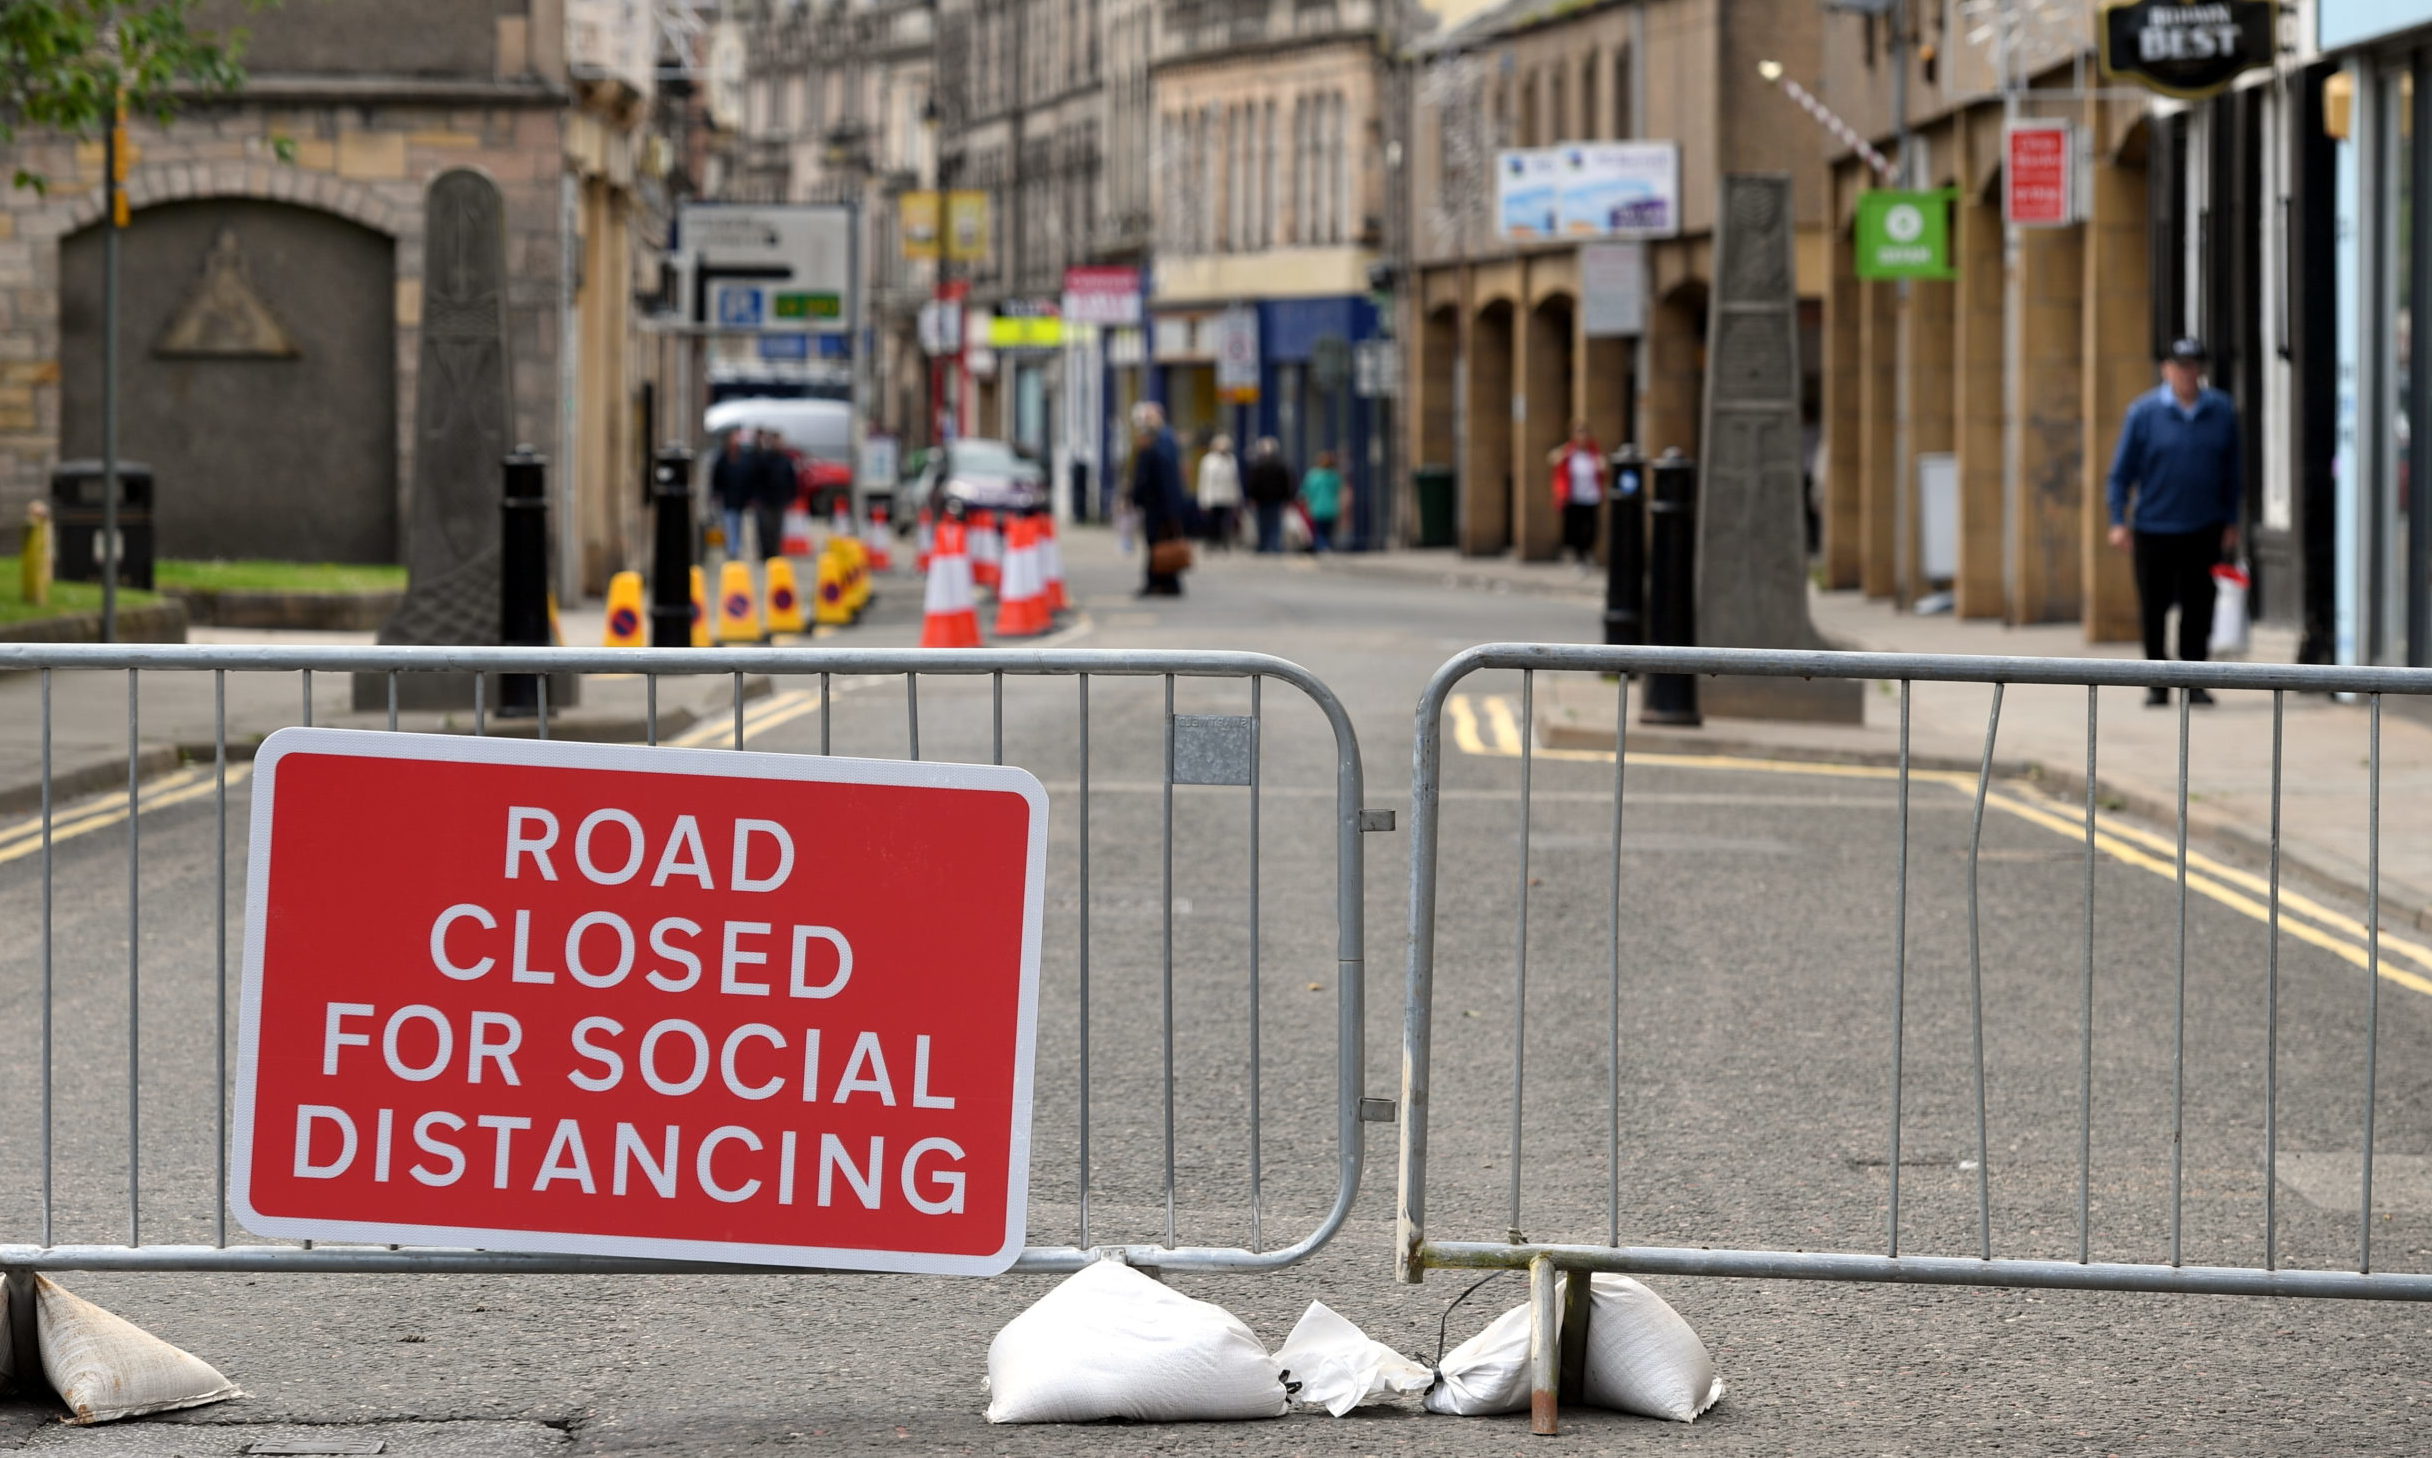 The east end of Elgin High Street will be closed daily to traffic from 11am to 4pm.